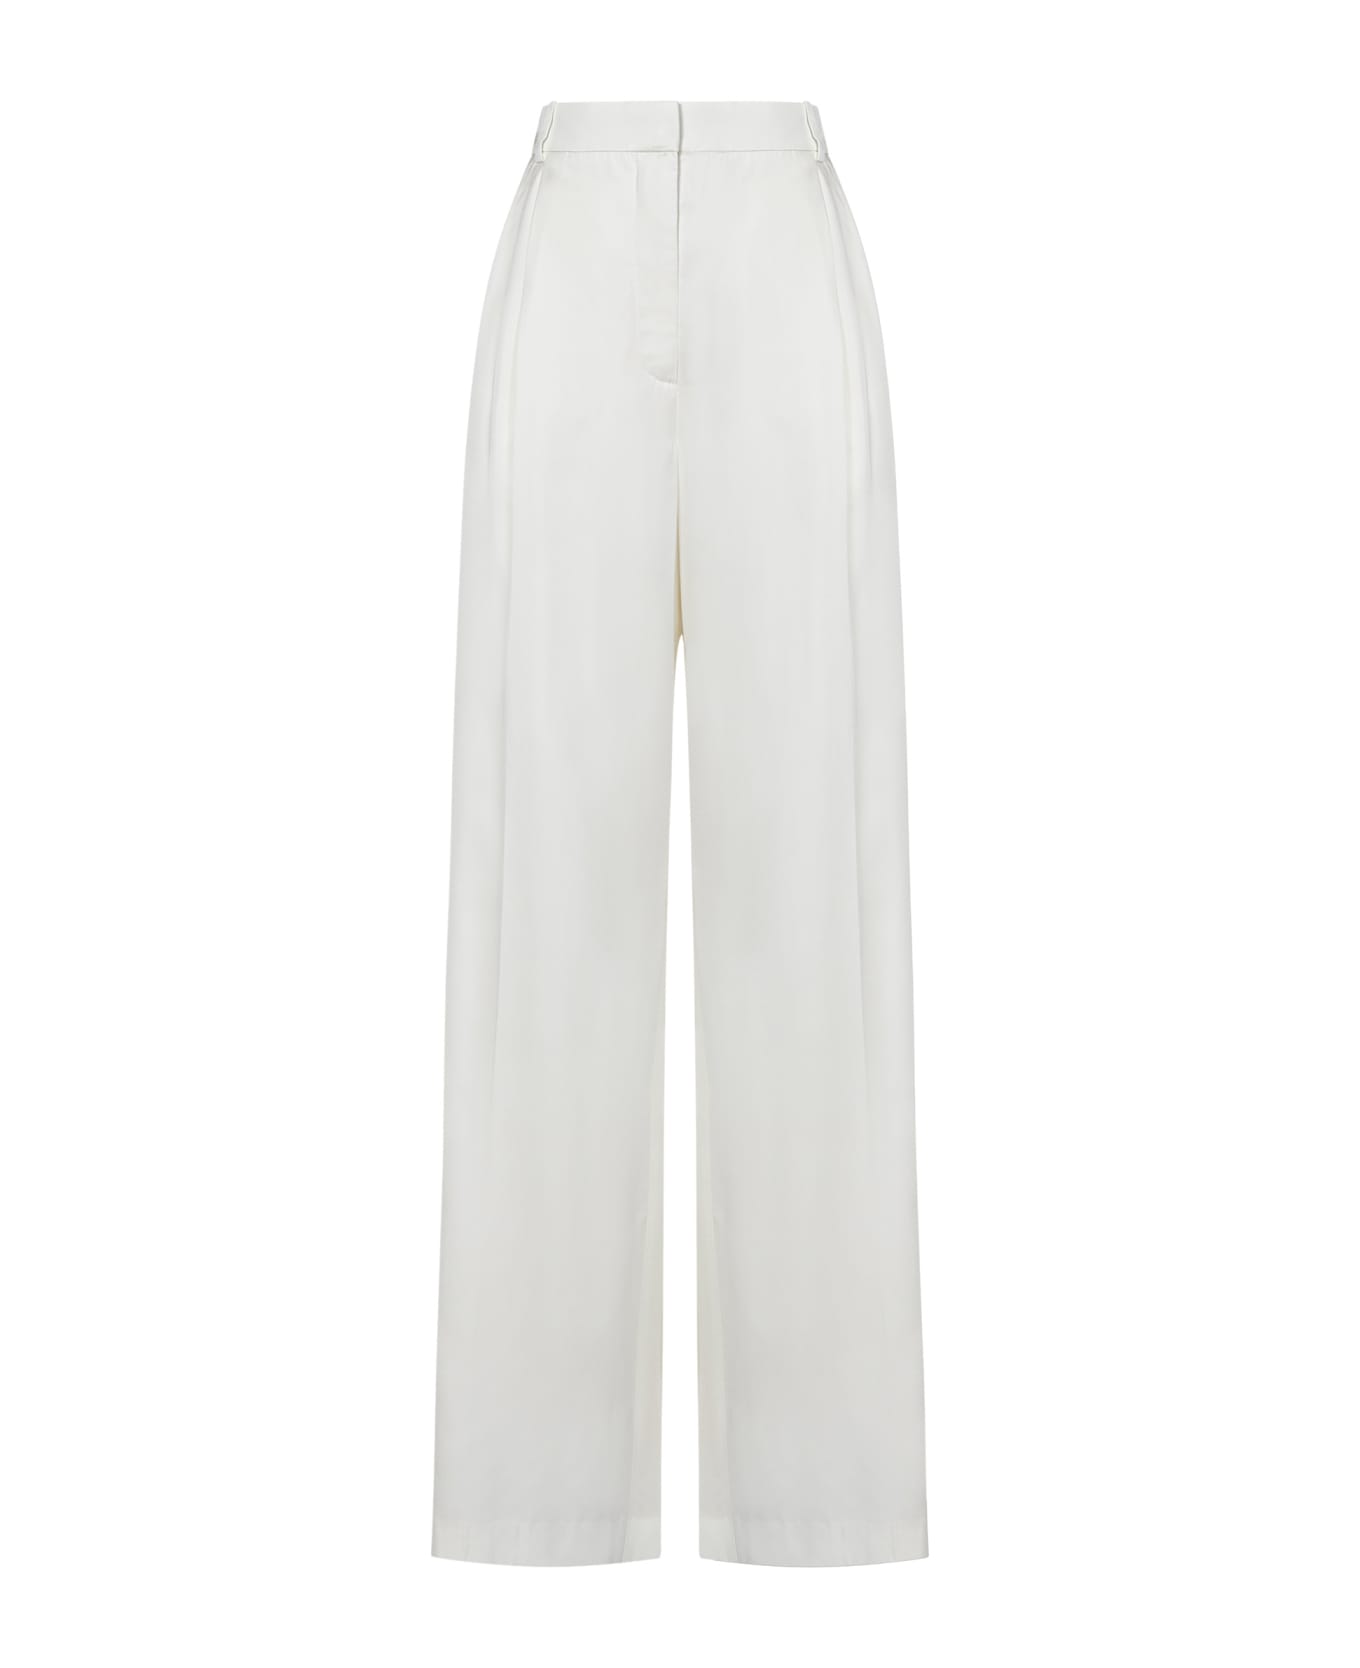 Alexander McQueen Trousers - White ボトムス